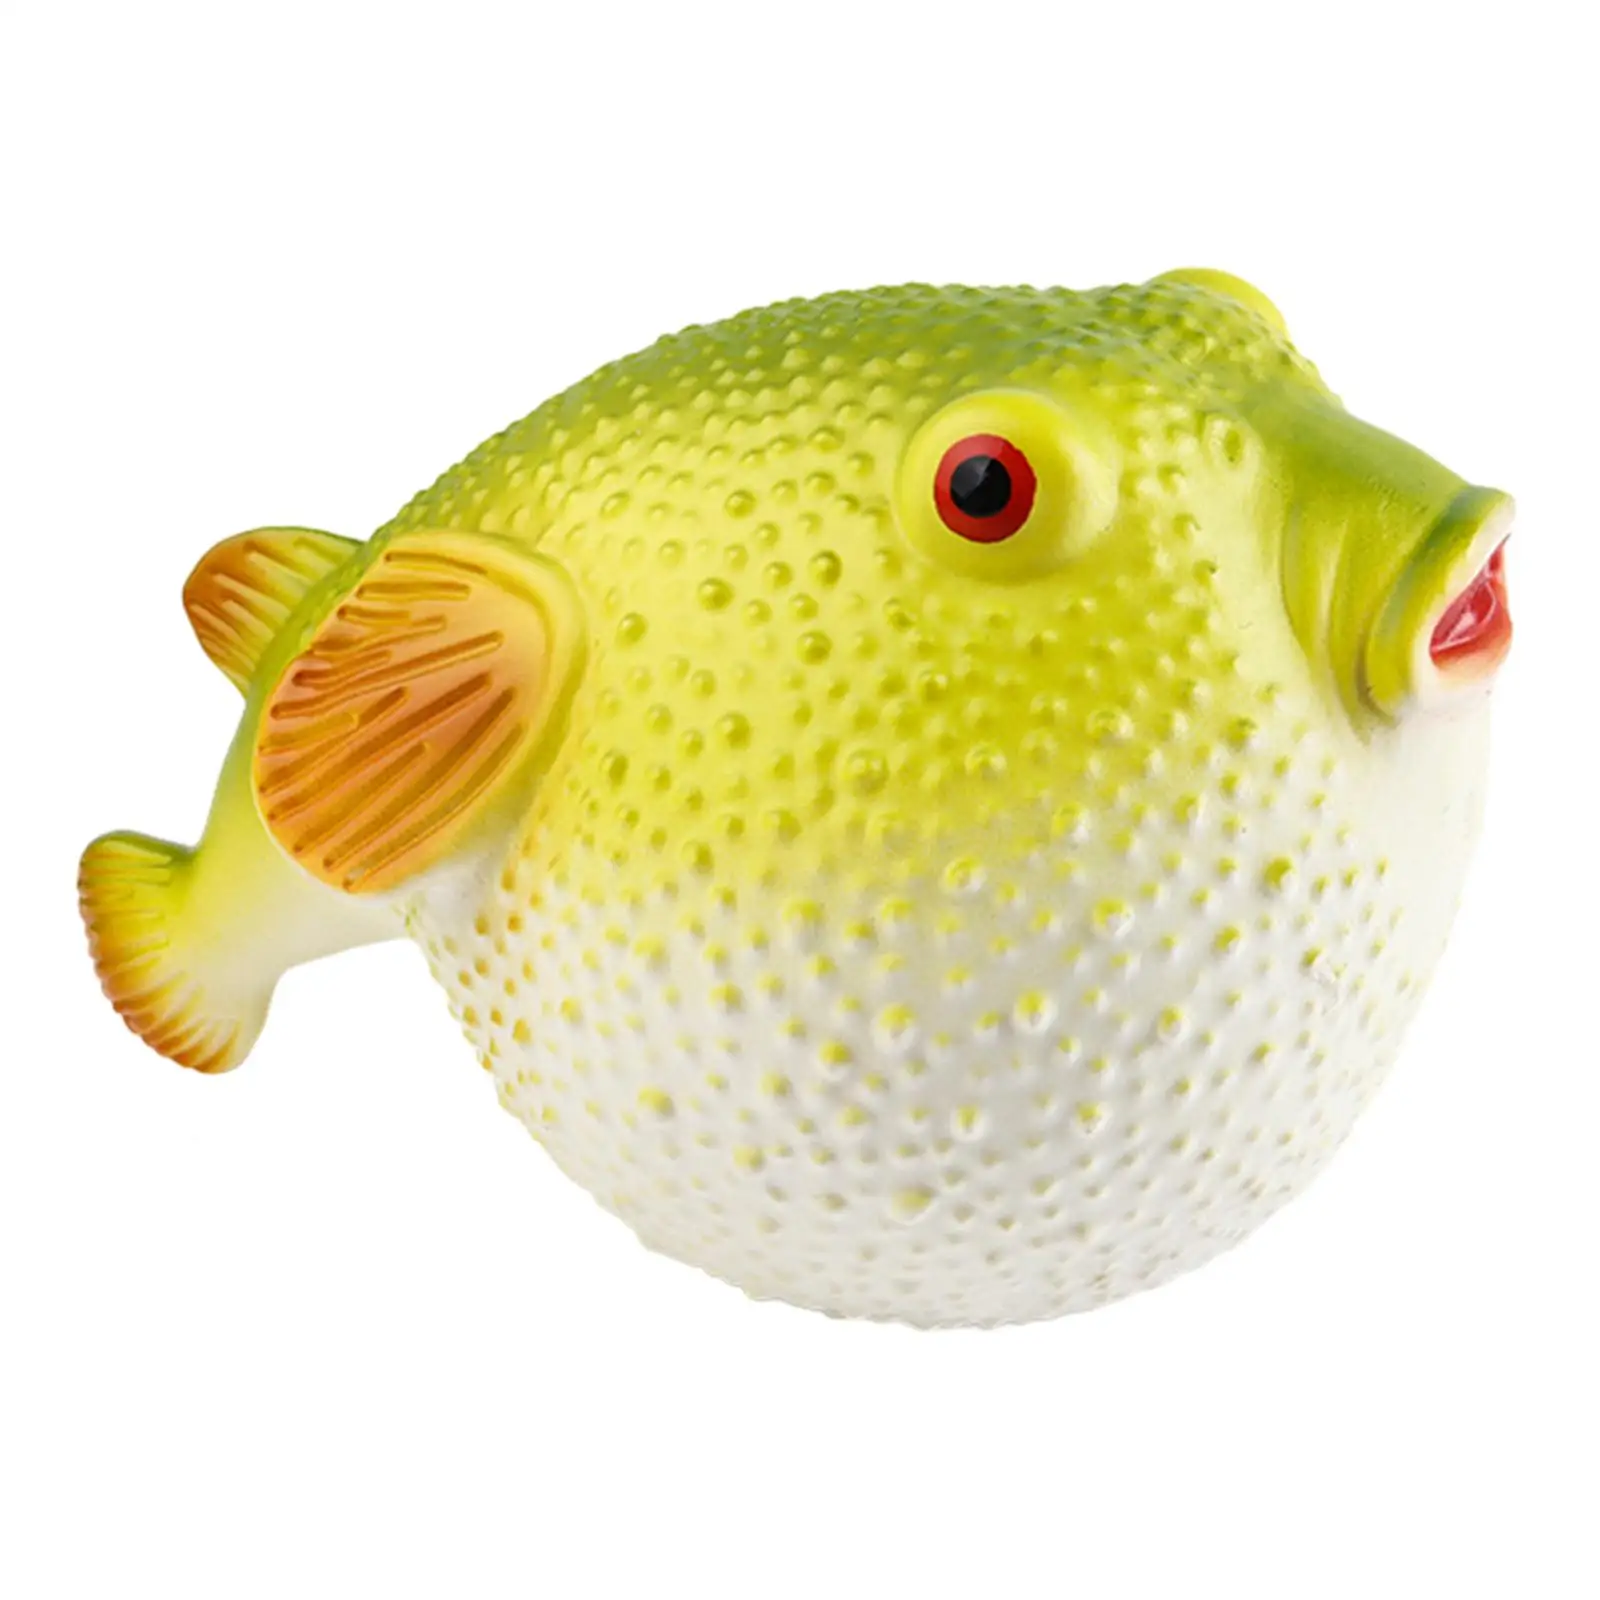 Stretch Toy Pufferfish Figure Model Relaxing Toy Small Animal Toy for Teens Adults Birthday Gifts Children Goodie Bag Filler